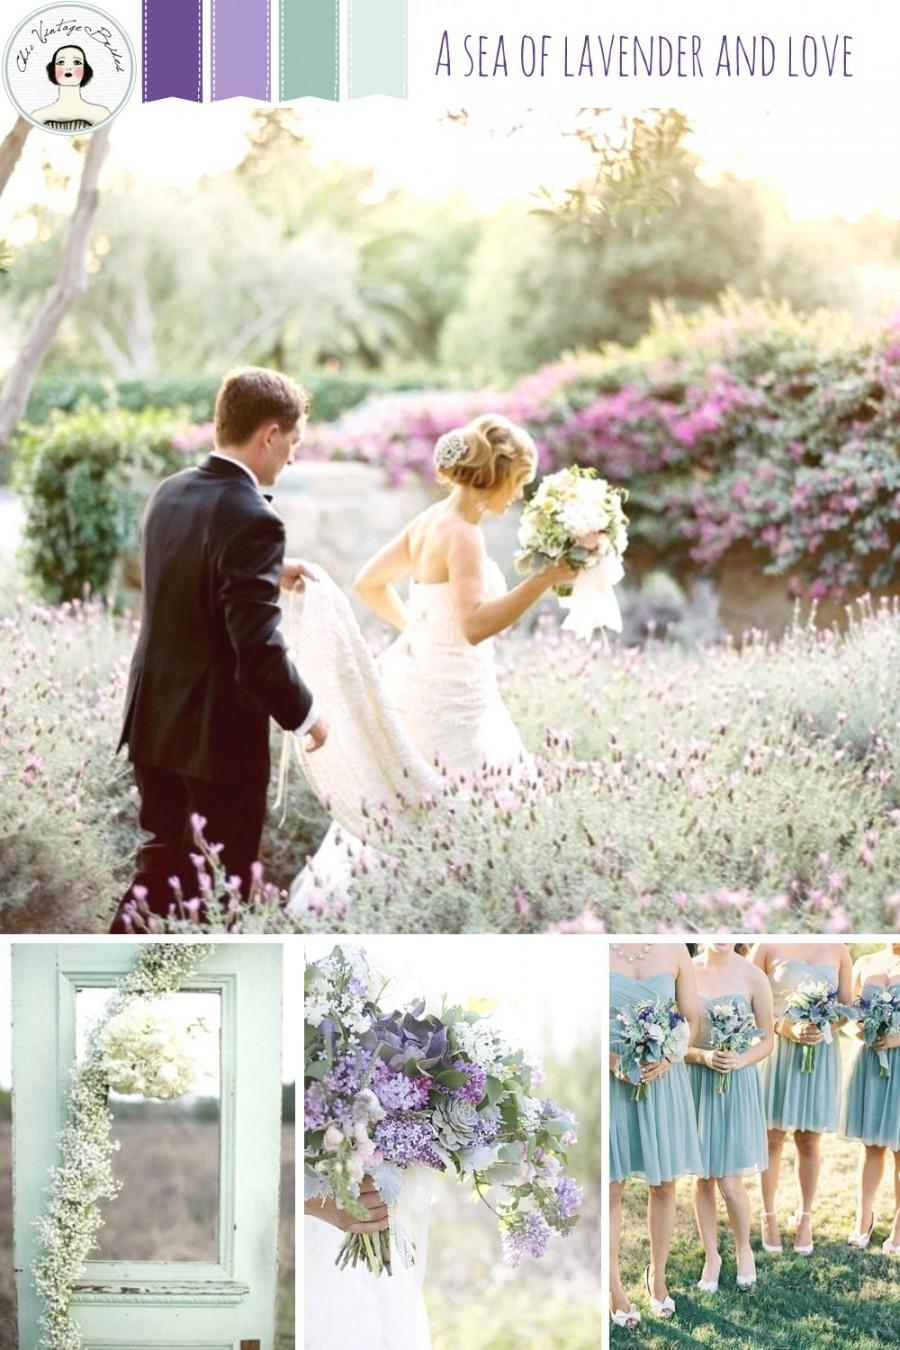 Hochzeit - A Sea of Lavender and Love - Romantic Wedding Inspiration in Shades of Lavender and Seafoam